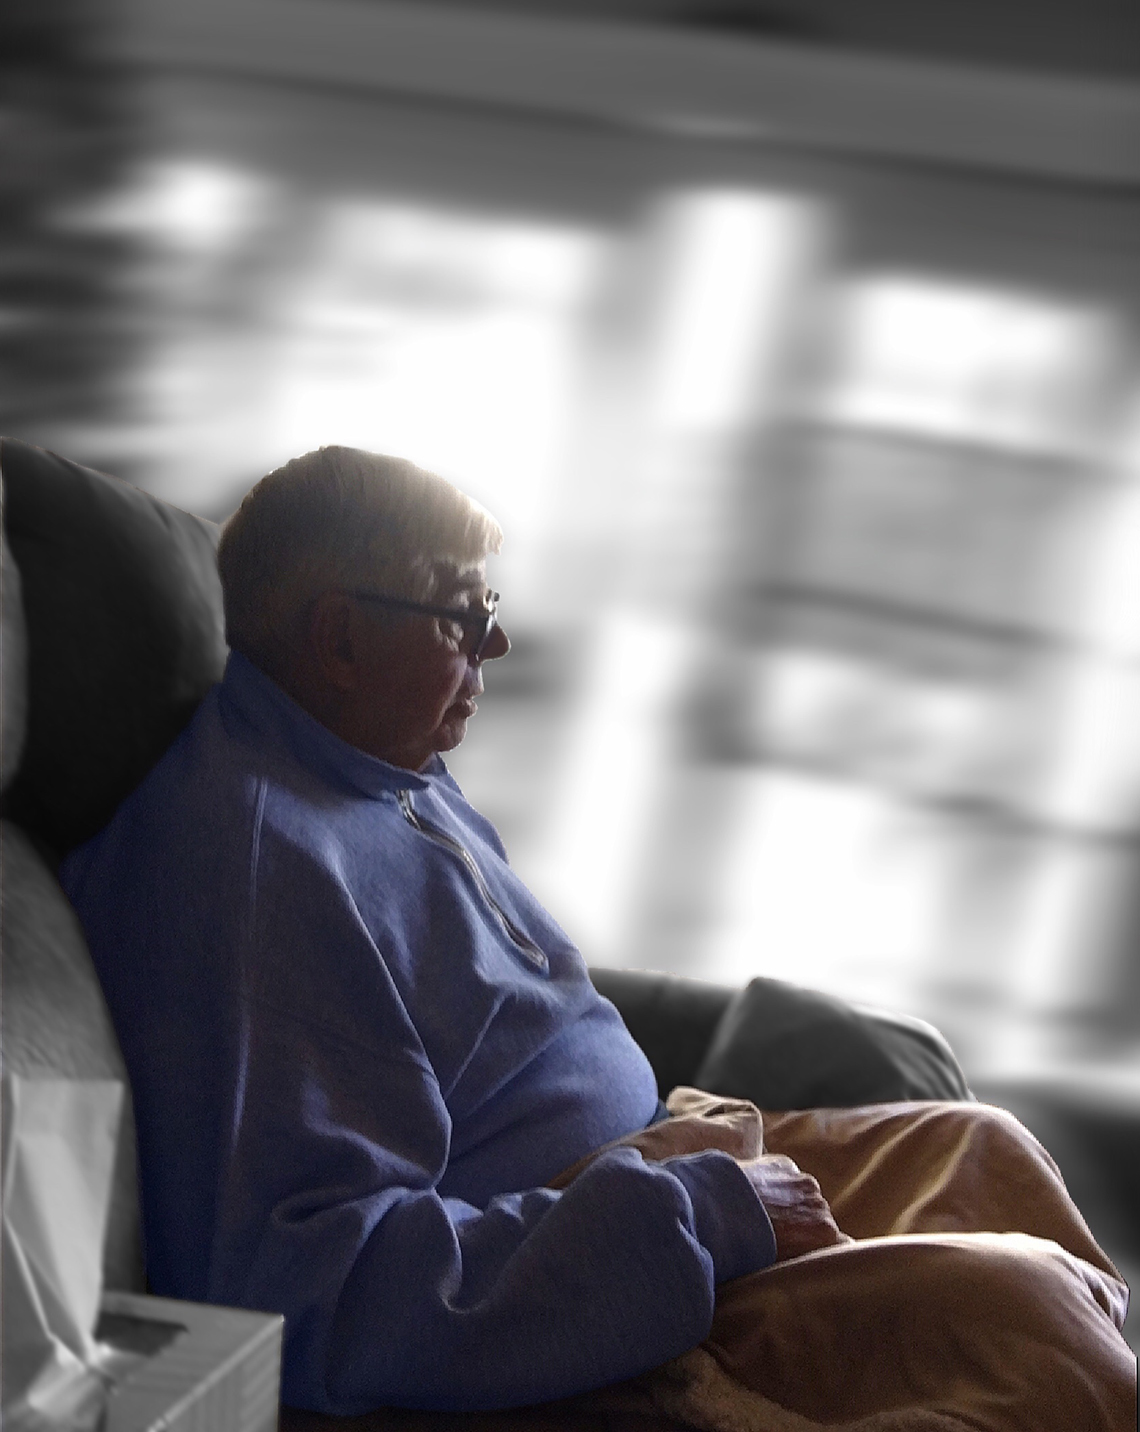 photograph of older man seated in chair with the room around him blurred